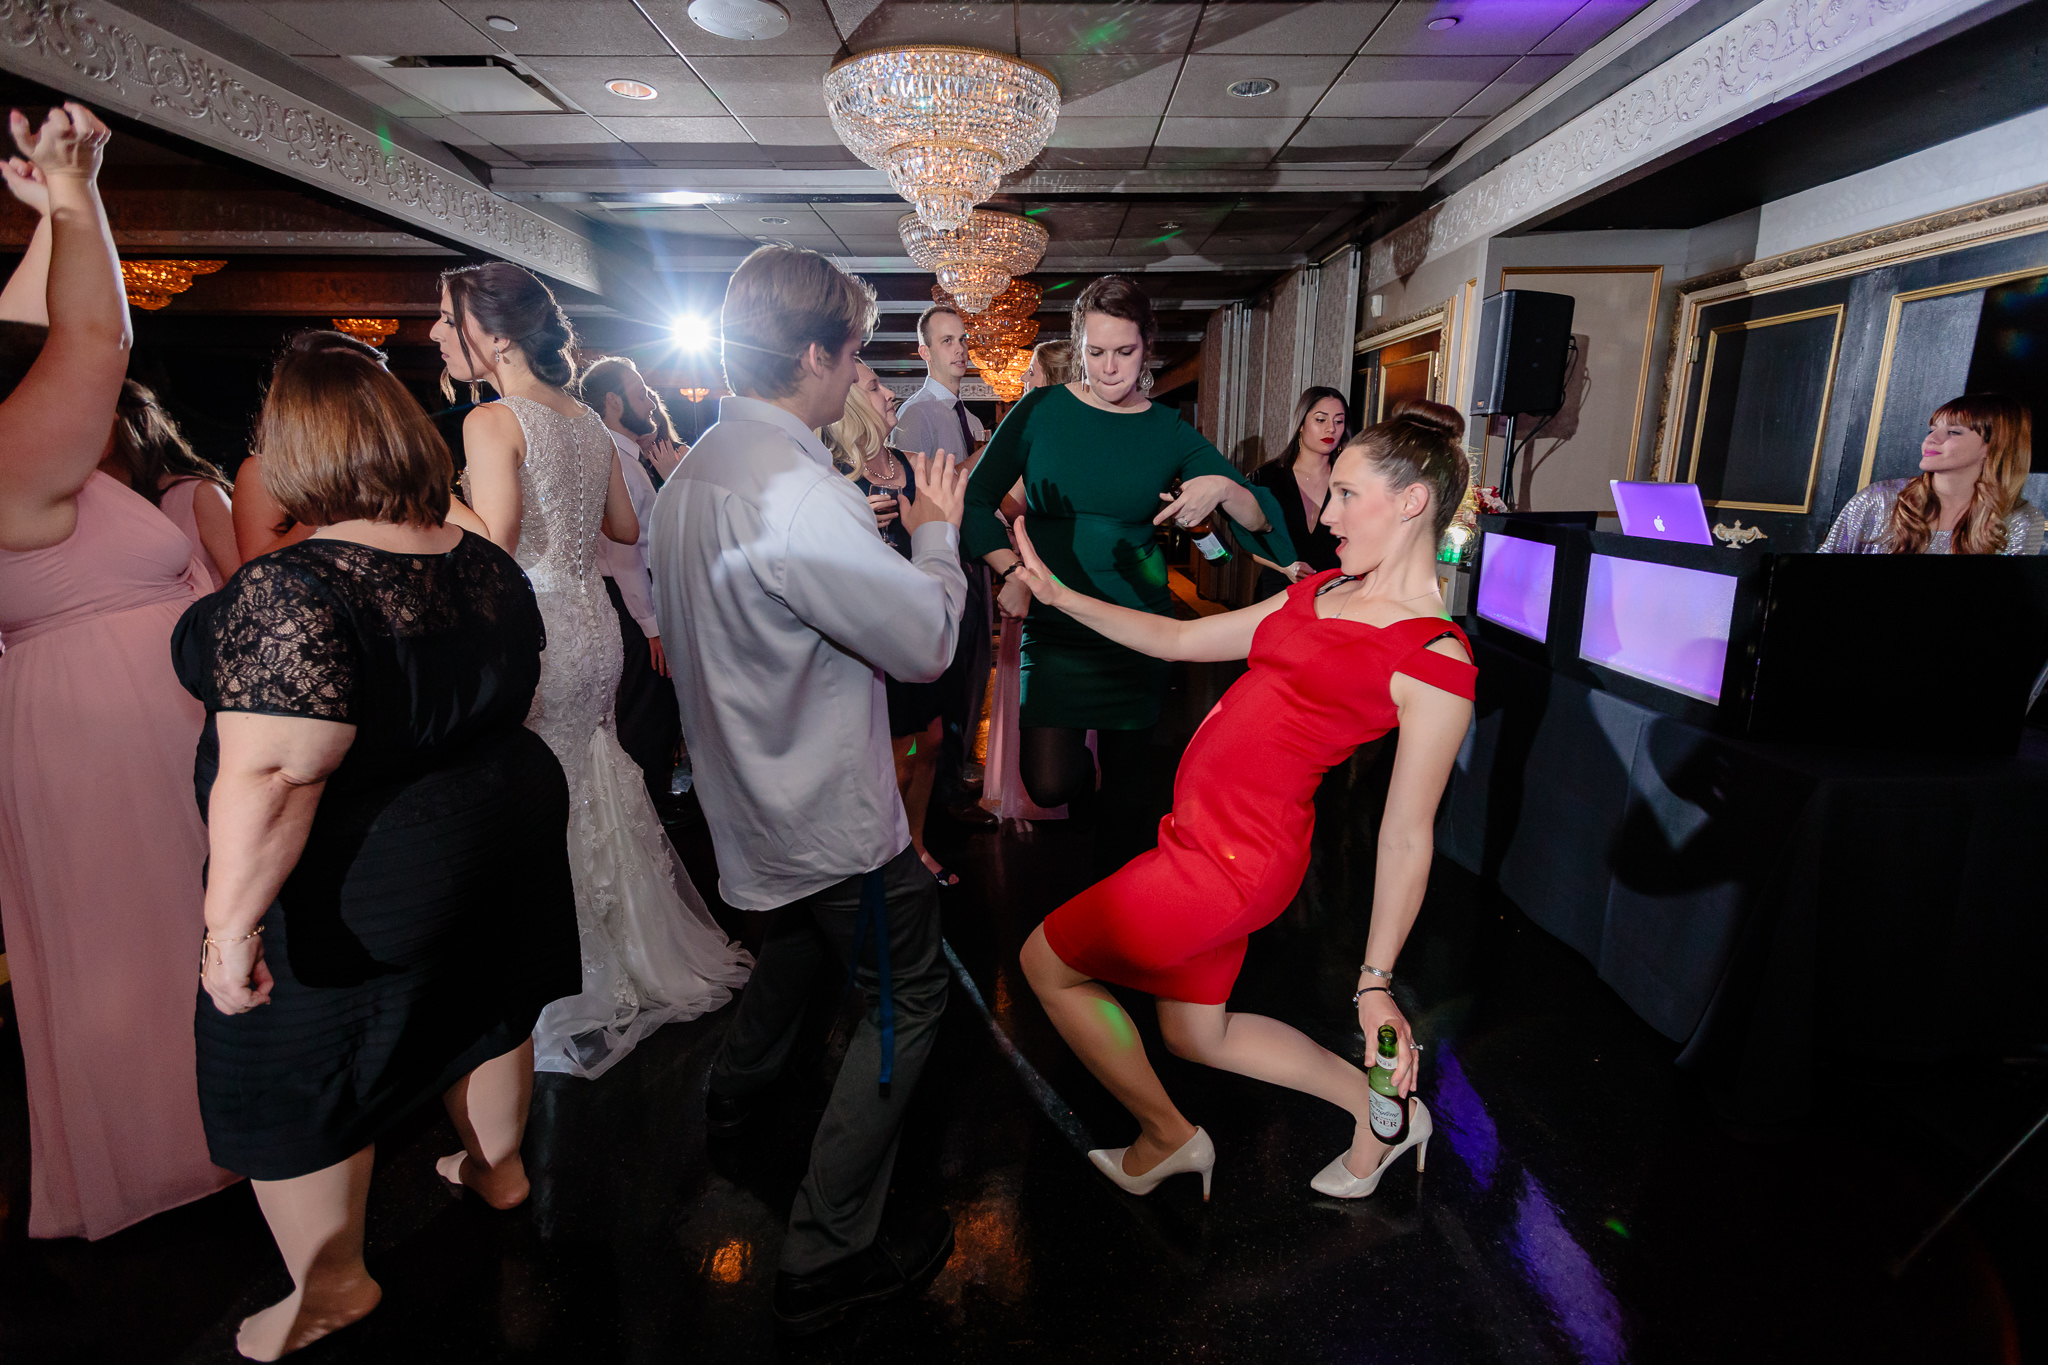 Guests on the dance floor at a LeMont wedding reception